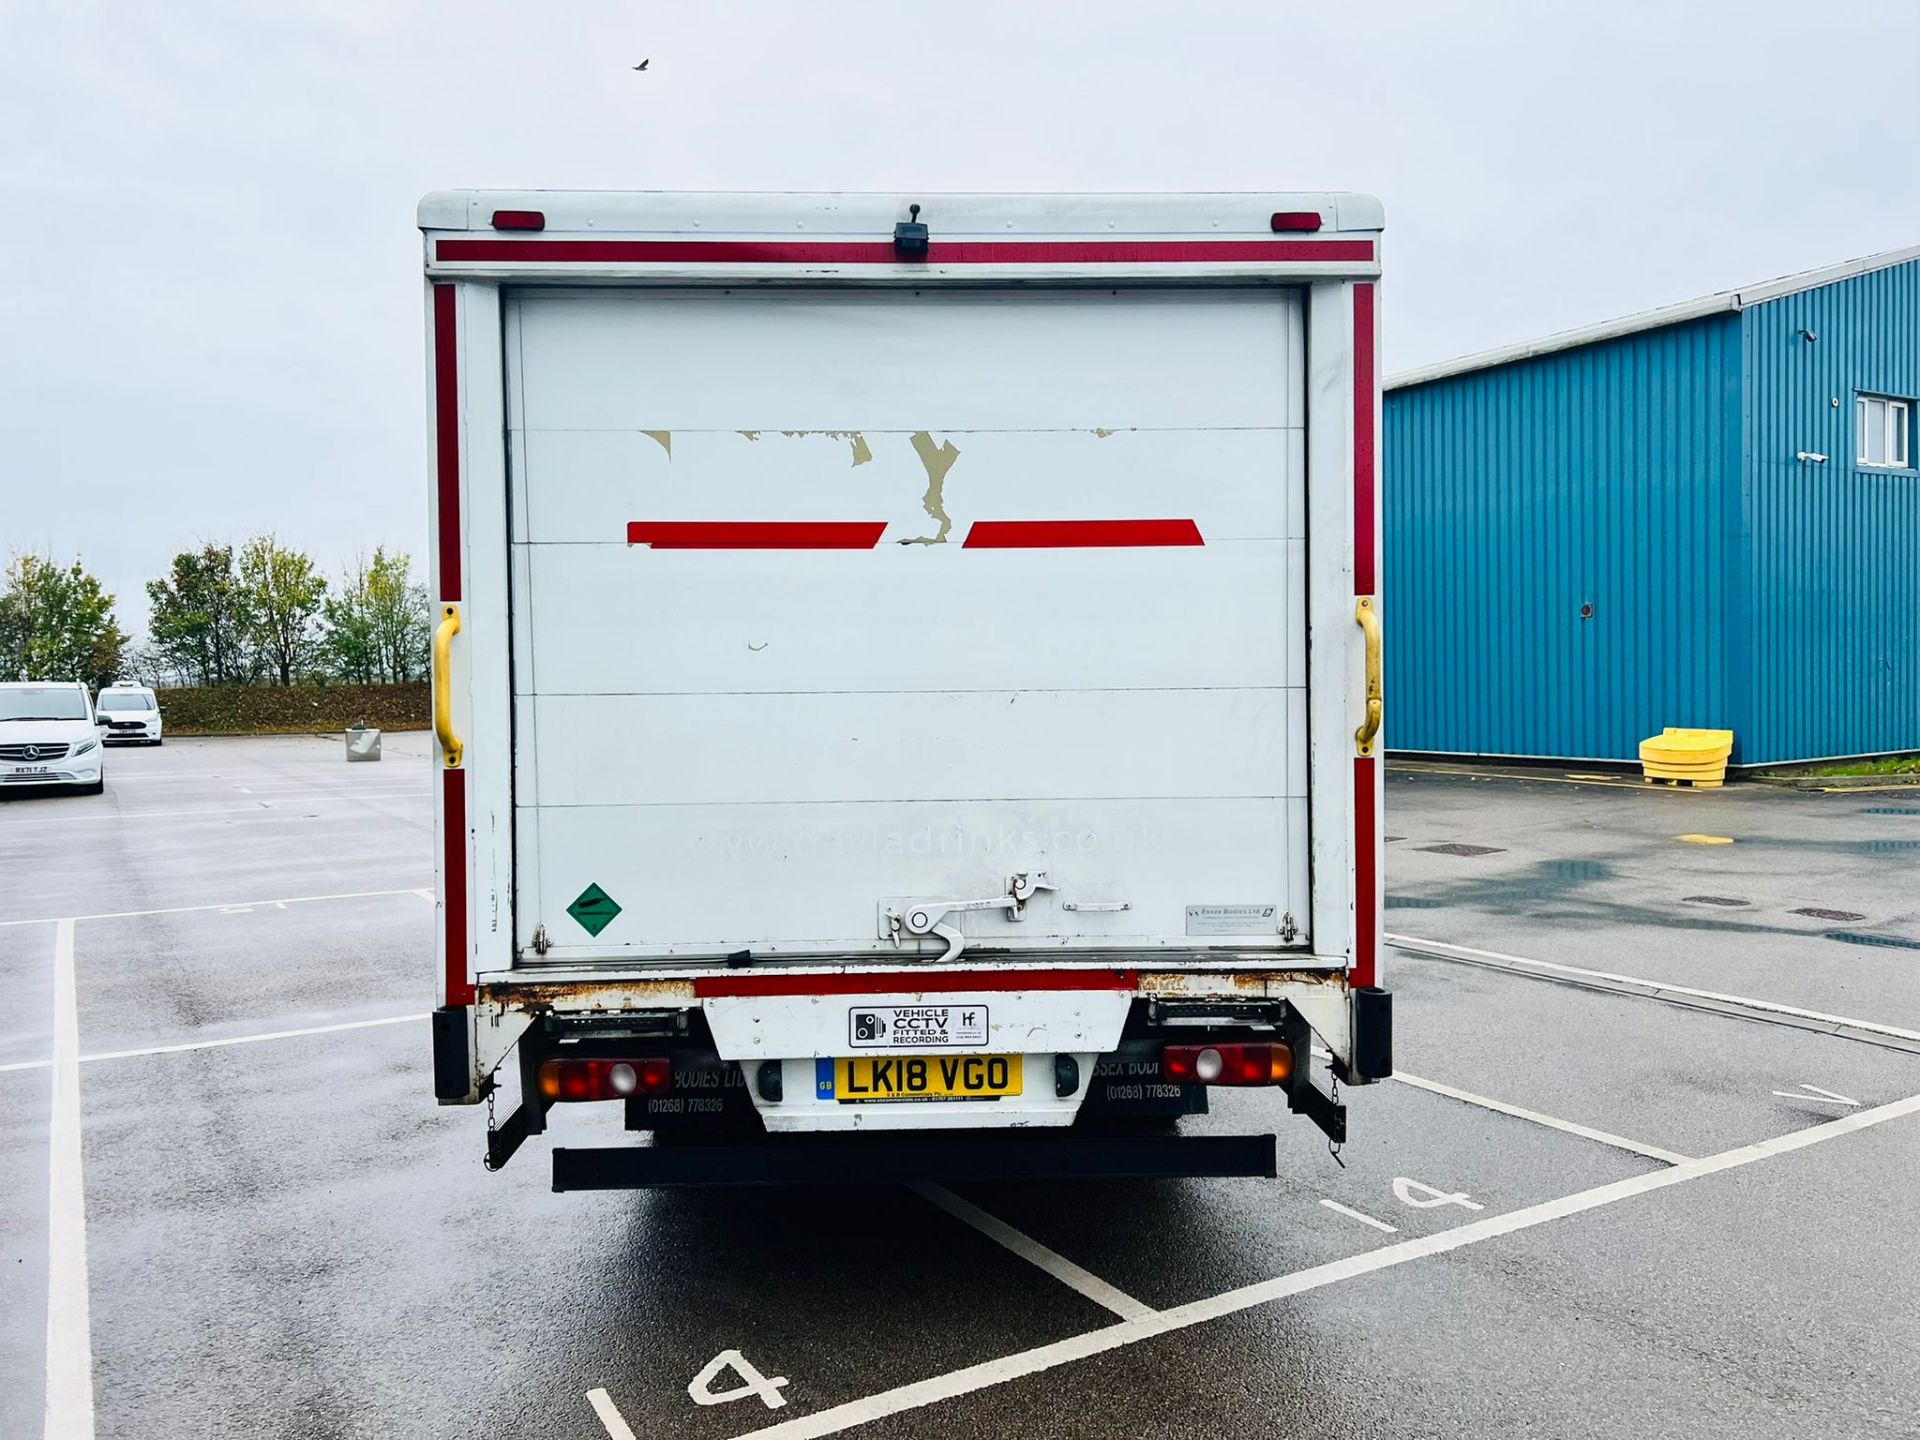 (RESERVE MET)Mitsubishi Fuso Canter 7C15 38 3.0 TD - 7.5 Curtainsider - 2018 18 Reg-69599 Miles Only - Image 9 of 15